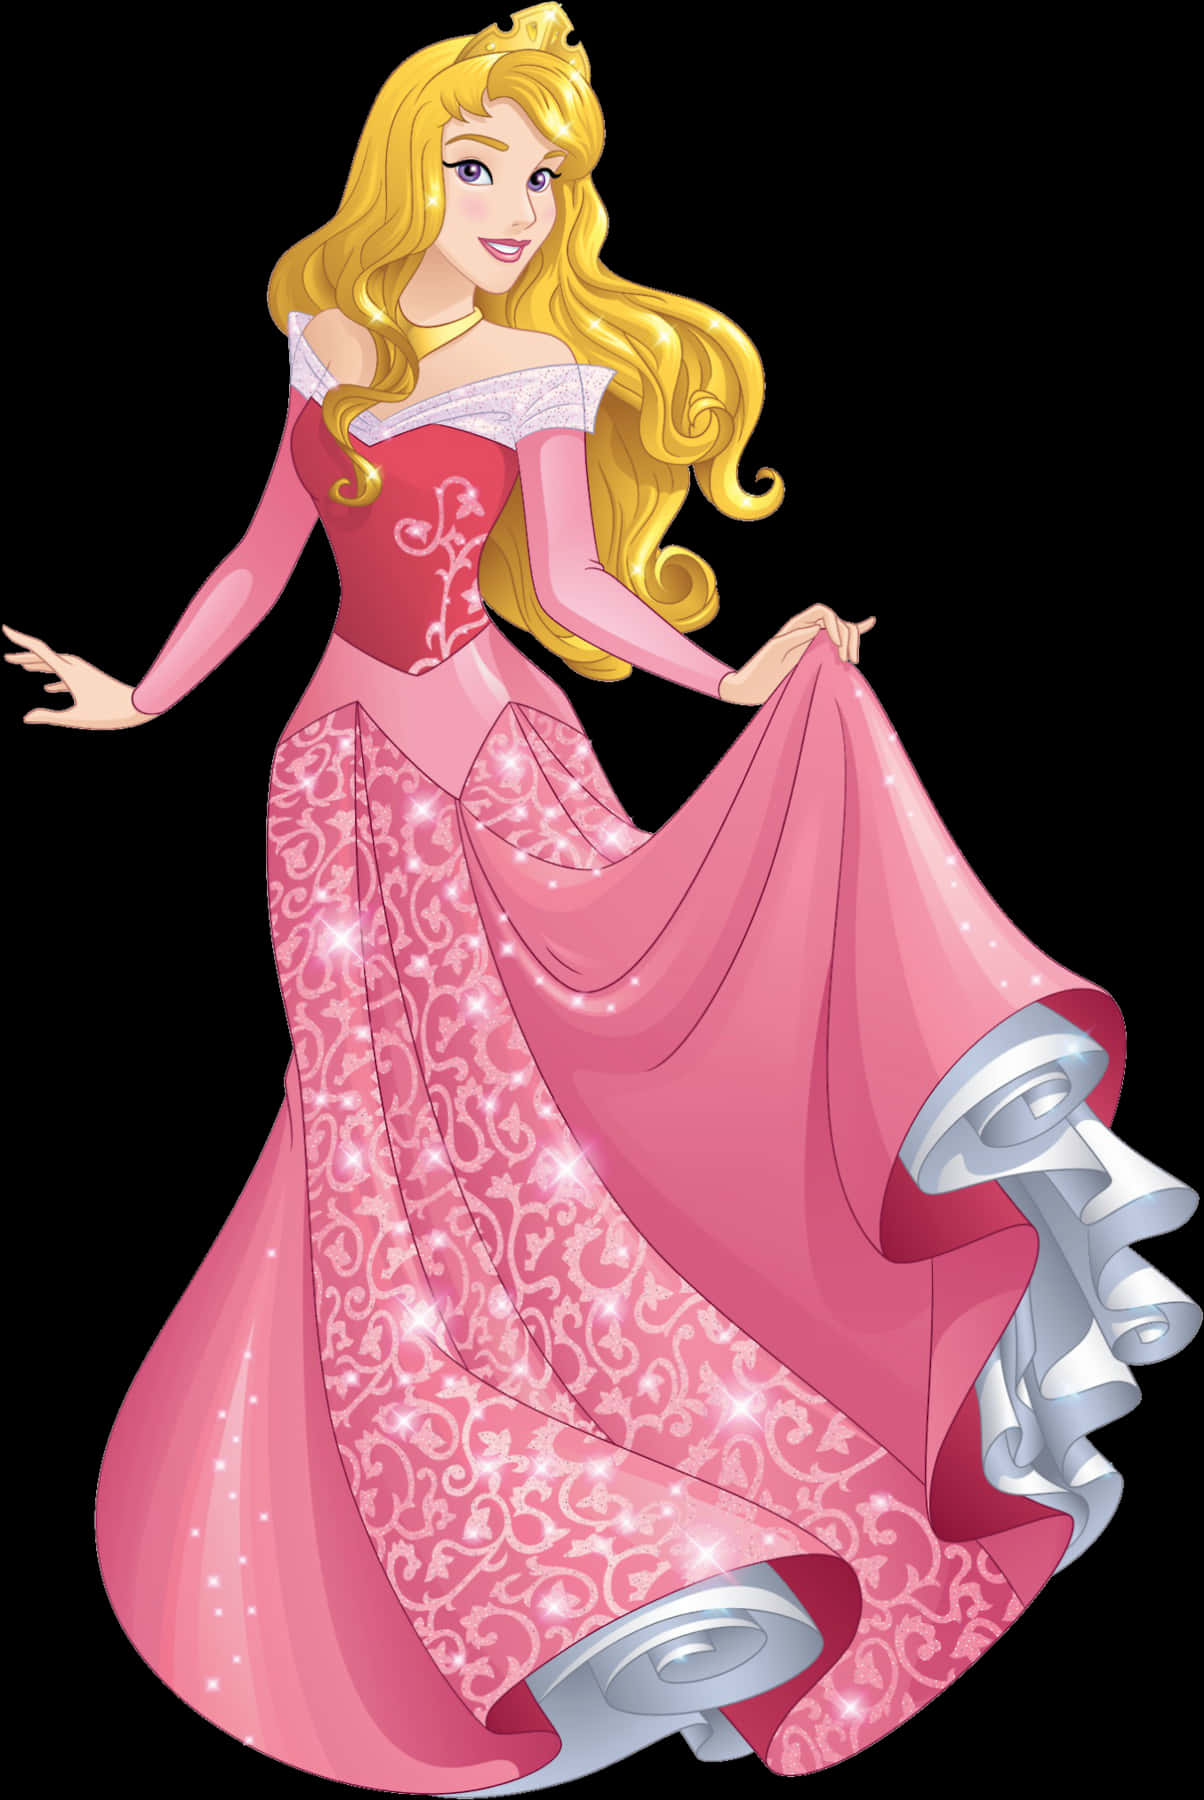 A Cartoon Of A Woman In A Pink Dress